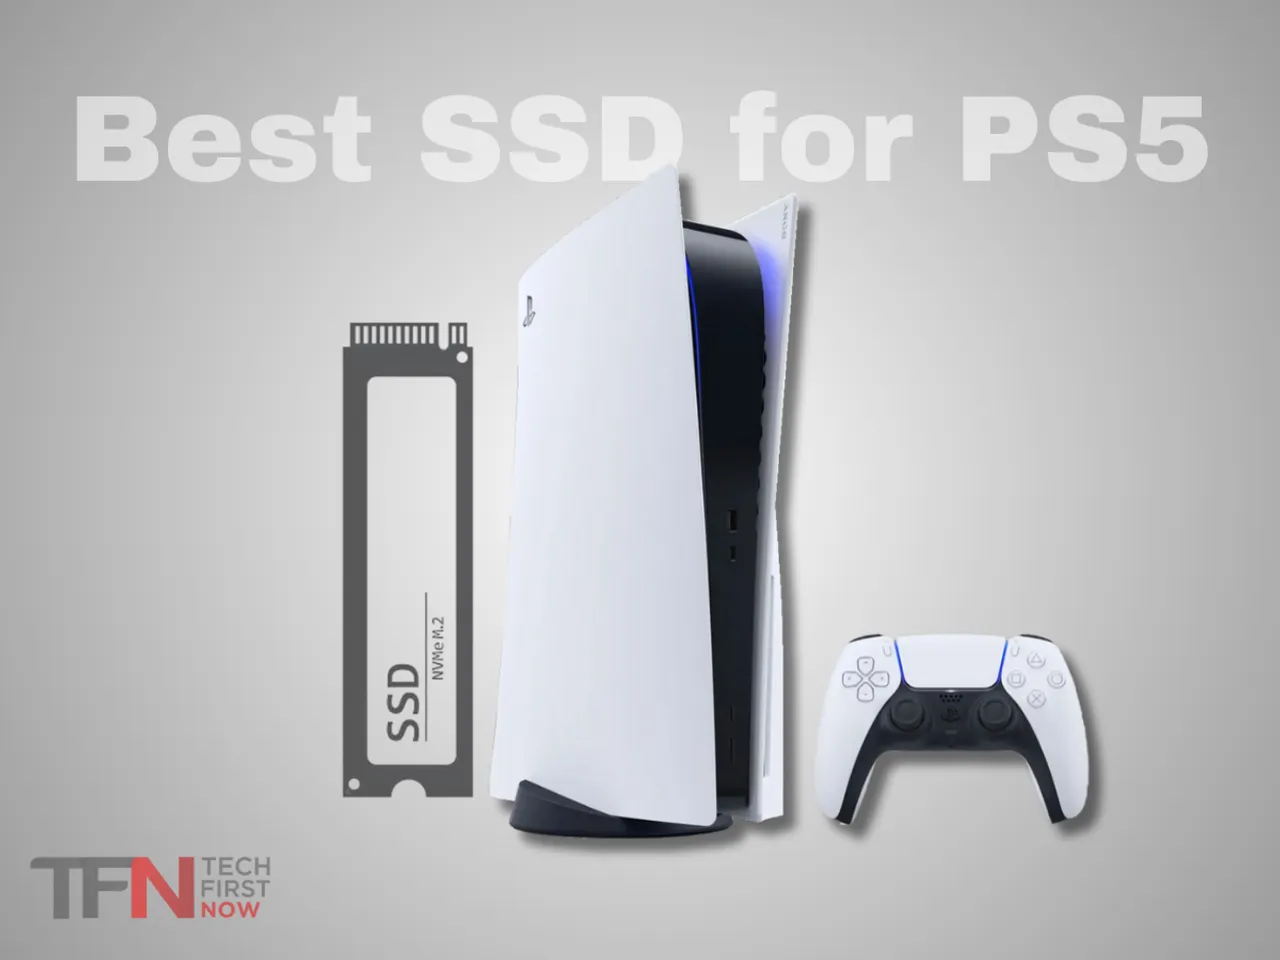 Best SSD for PS5 under $150